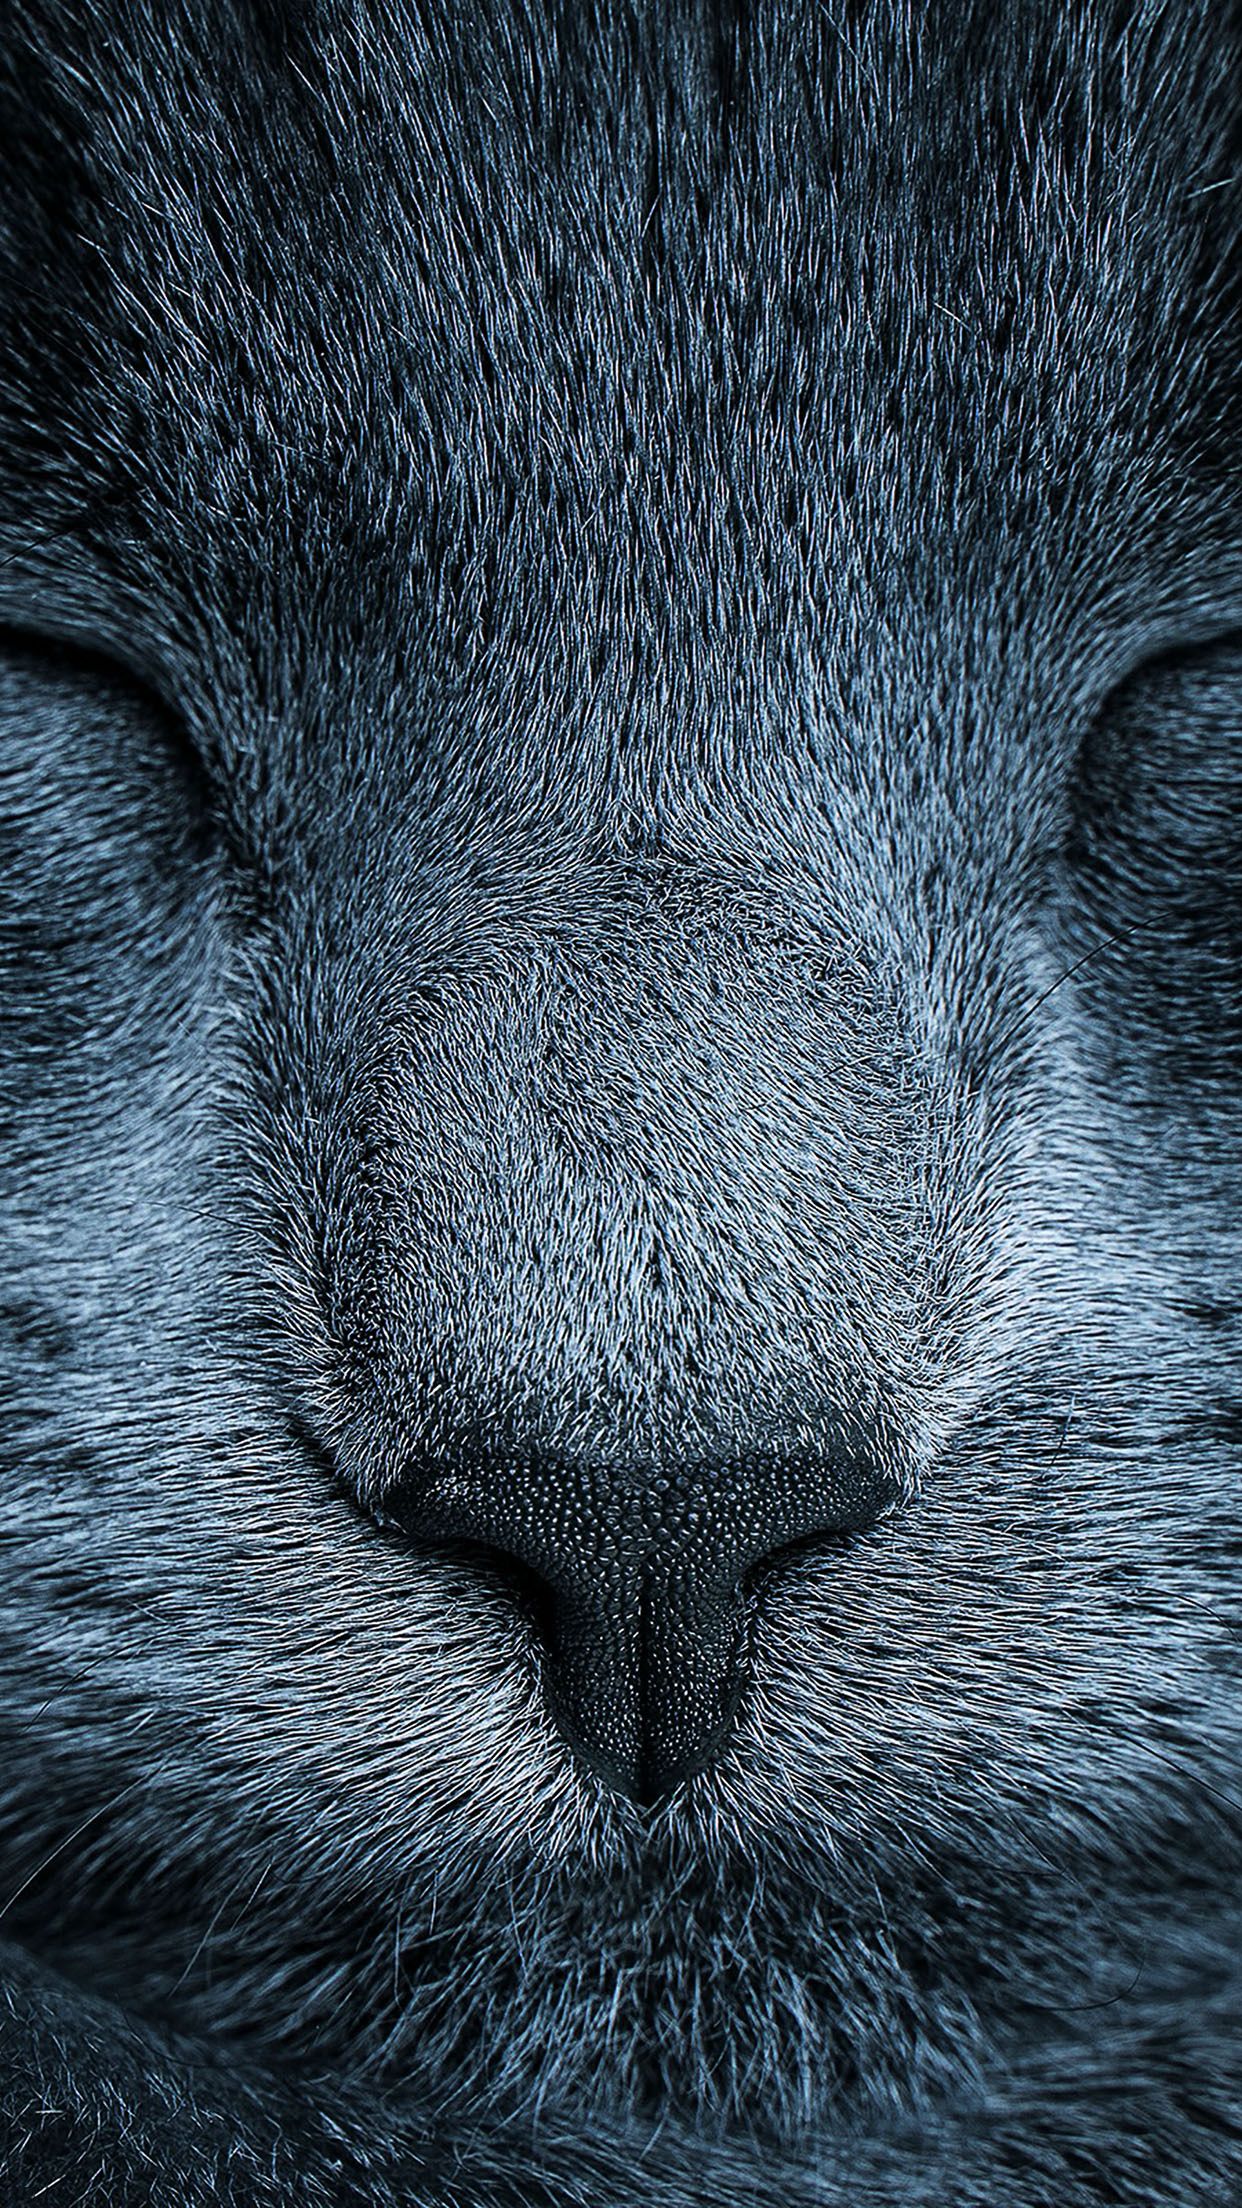 Sleeping Cat Eyes Closed Grey Close Up Android Wallpaper free download